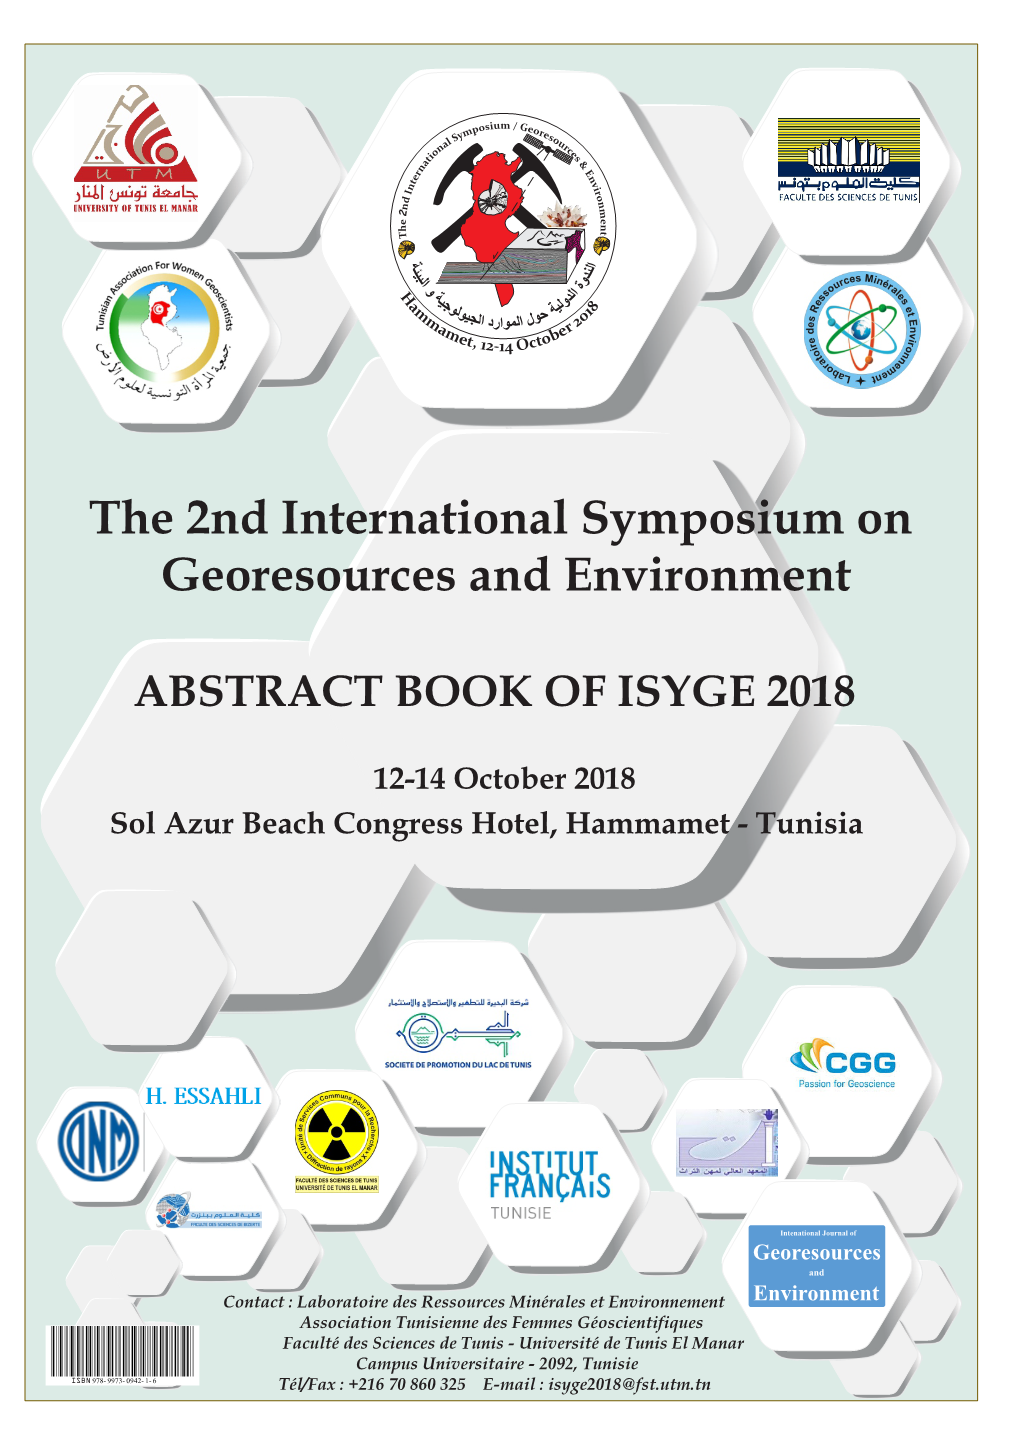 The 2Nd International Symposium on Georesources and Environment